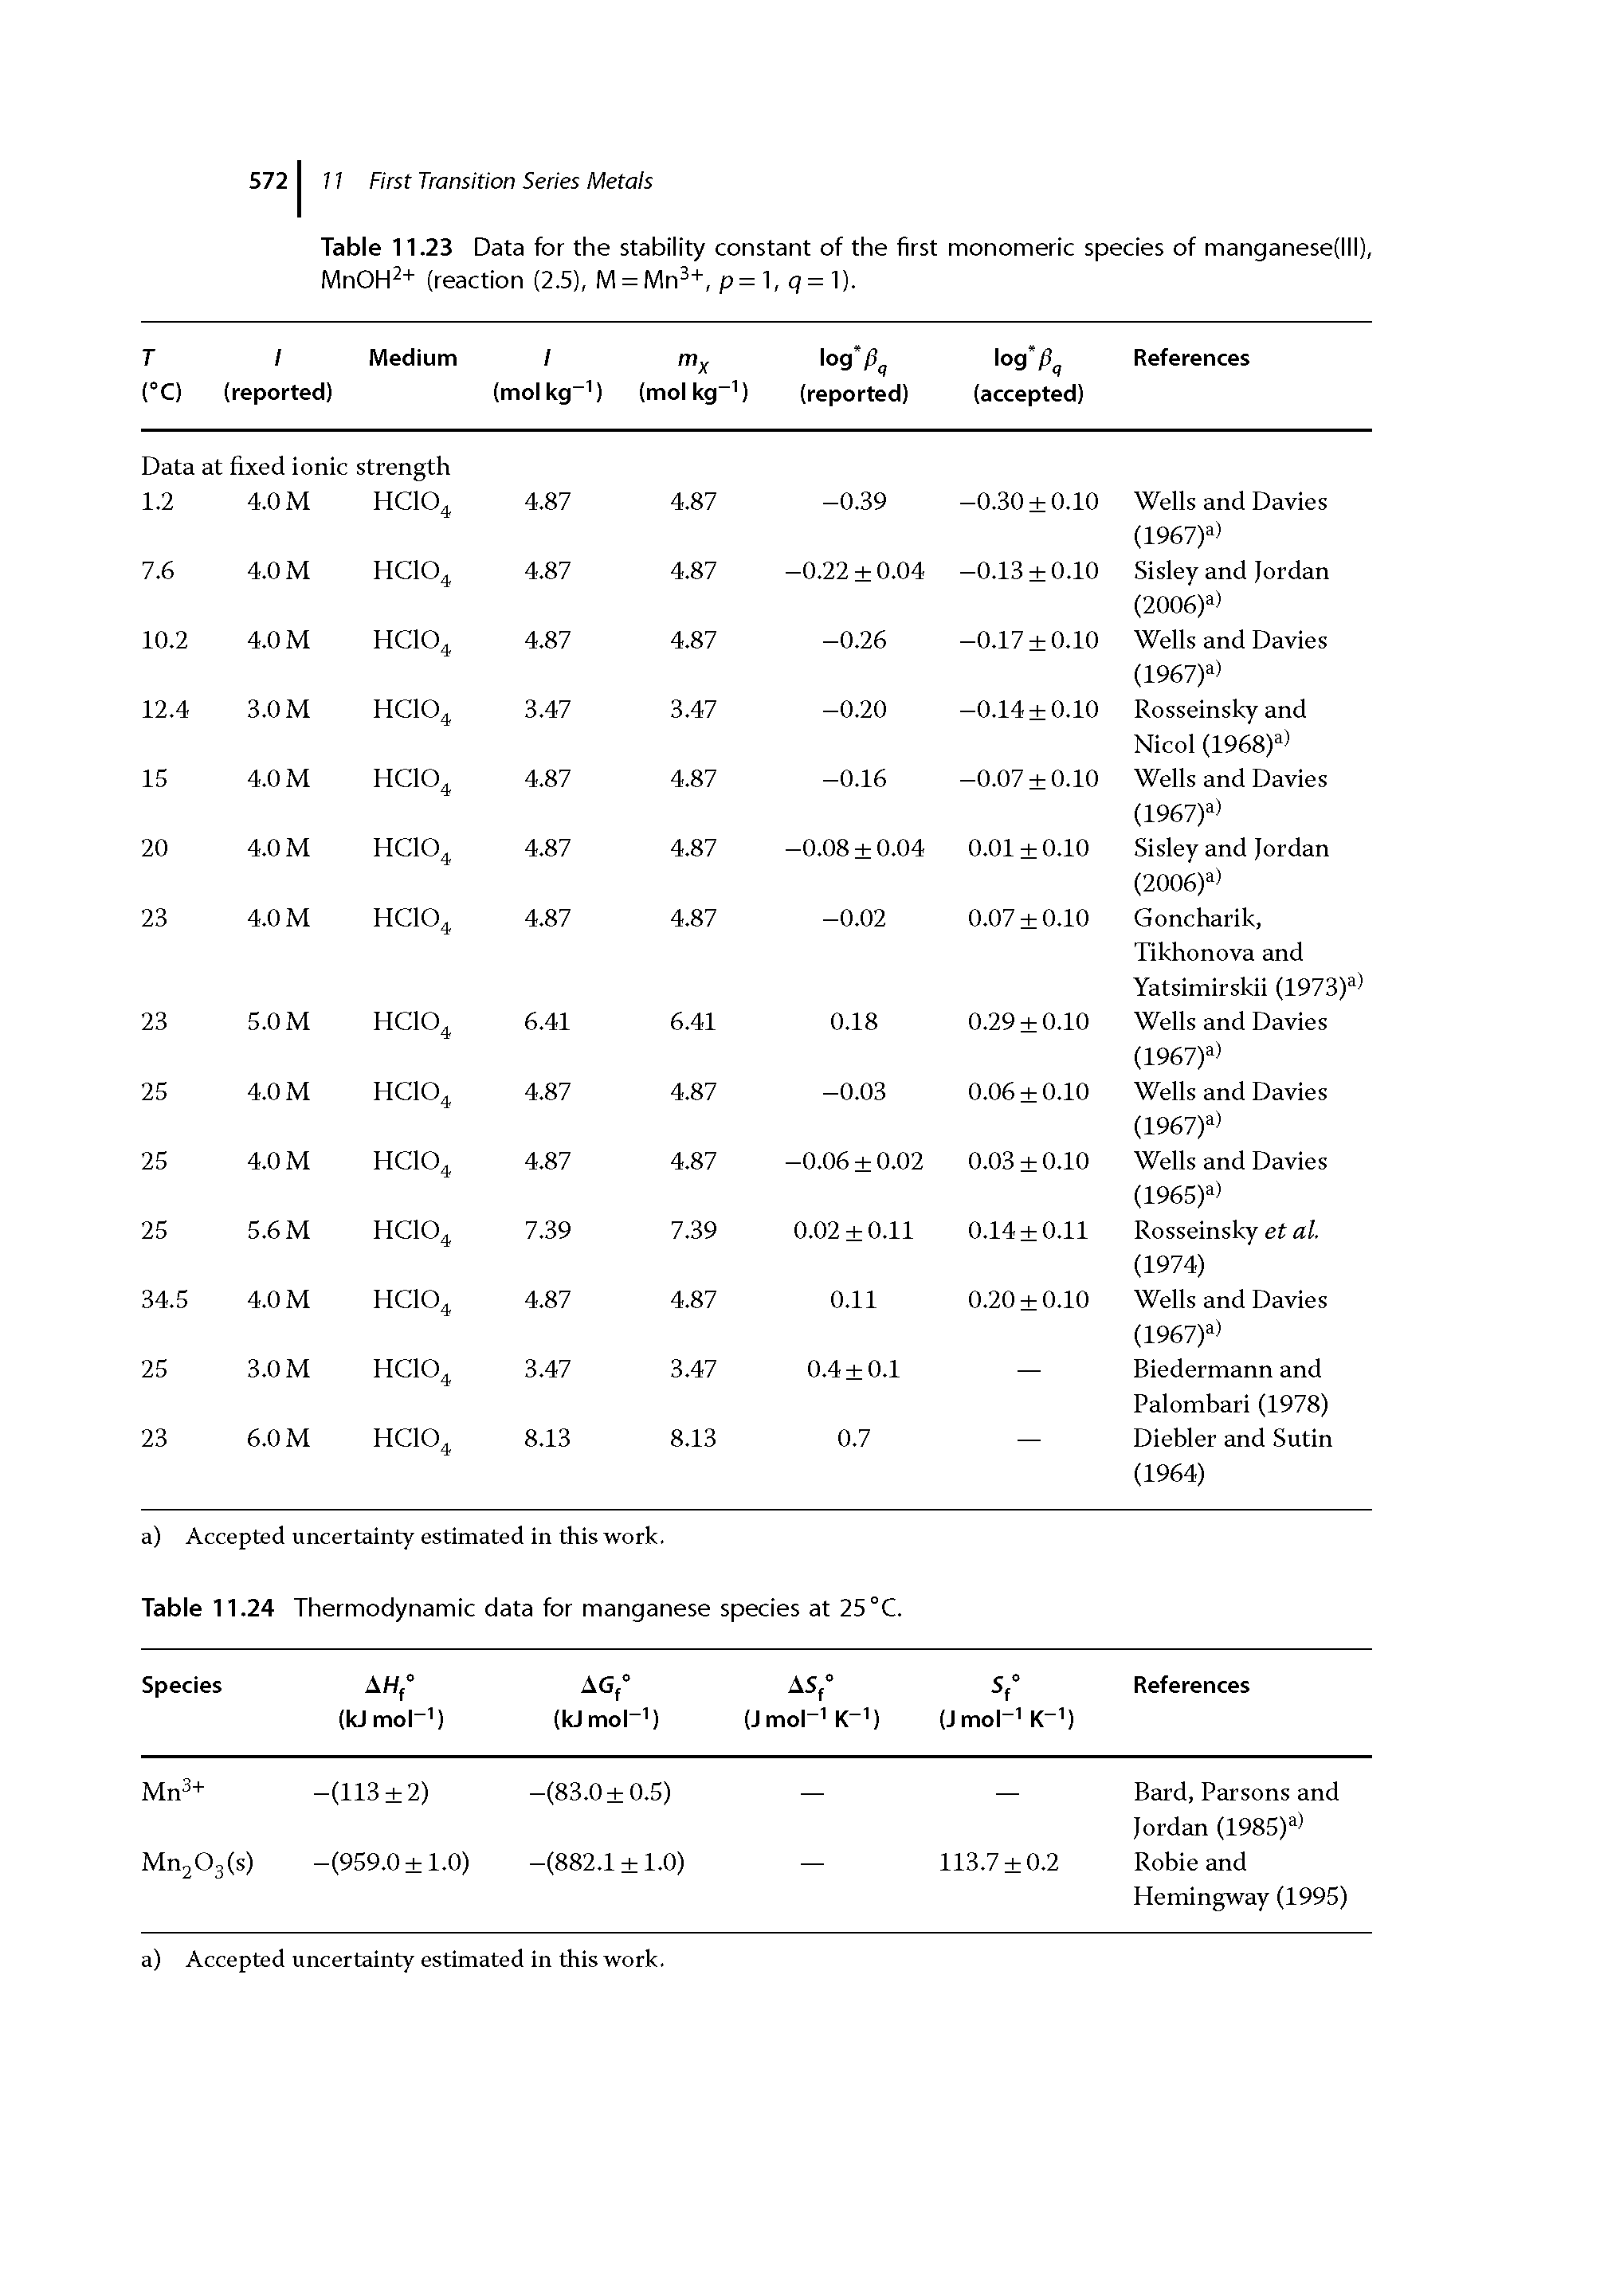 Table 11.23 Data for the stability constant of the first monomeric species of manganese(lll), MnOH (reaction (2.5), M = Mn, p= q = 1).